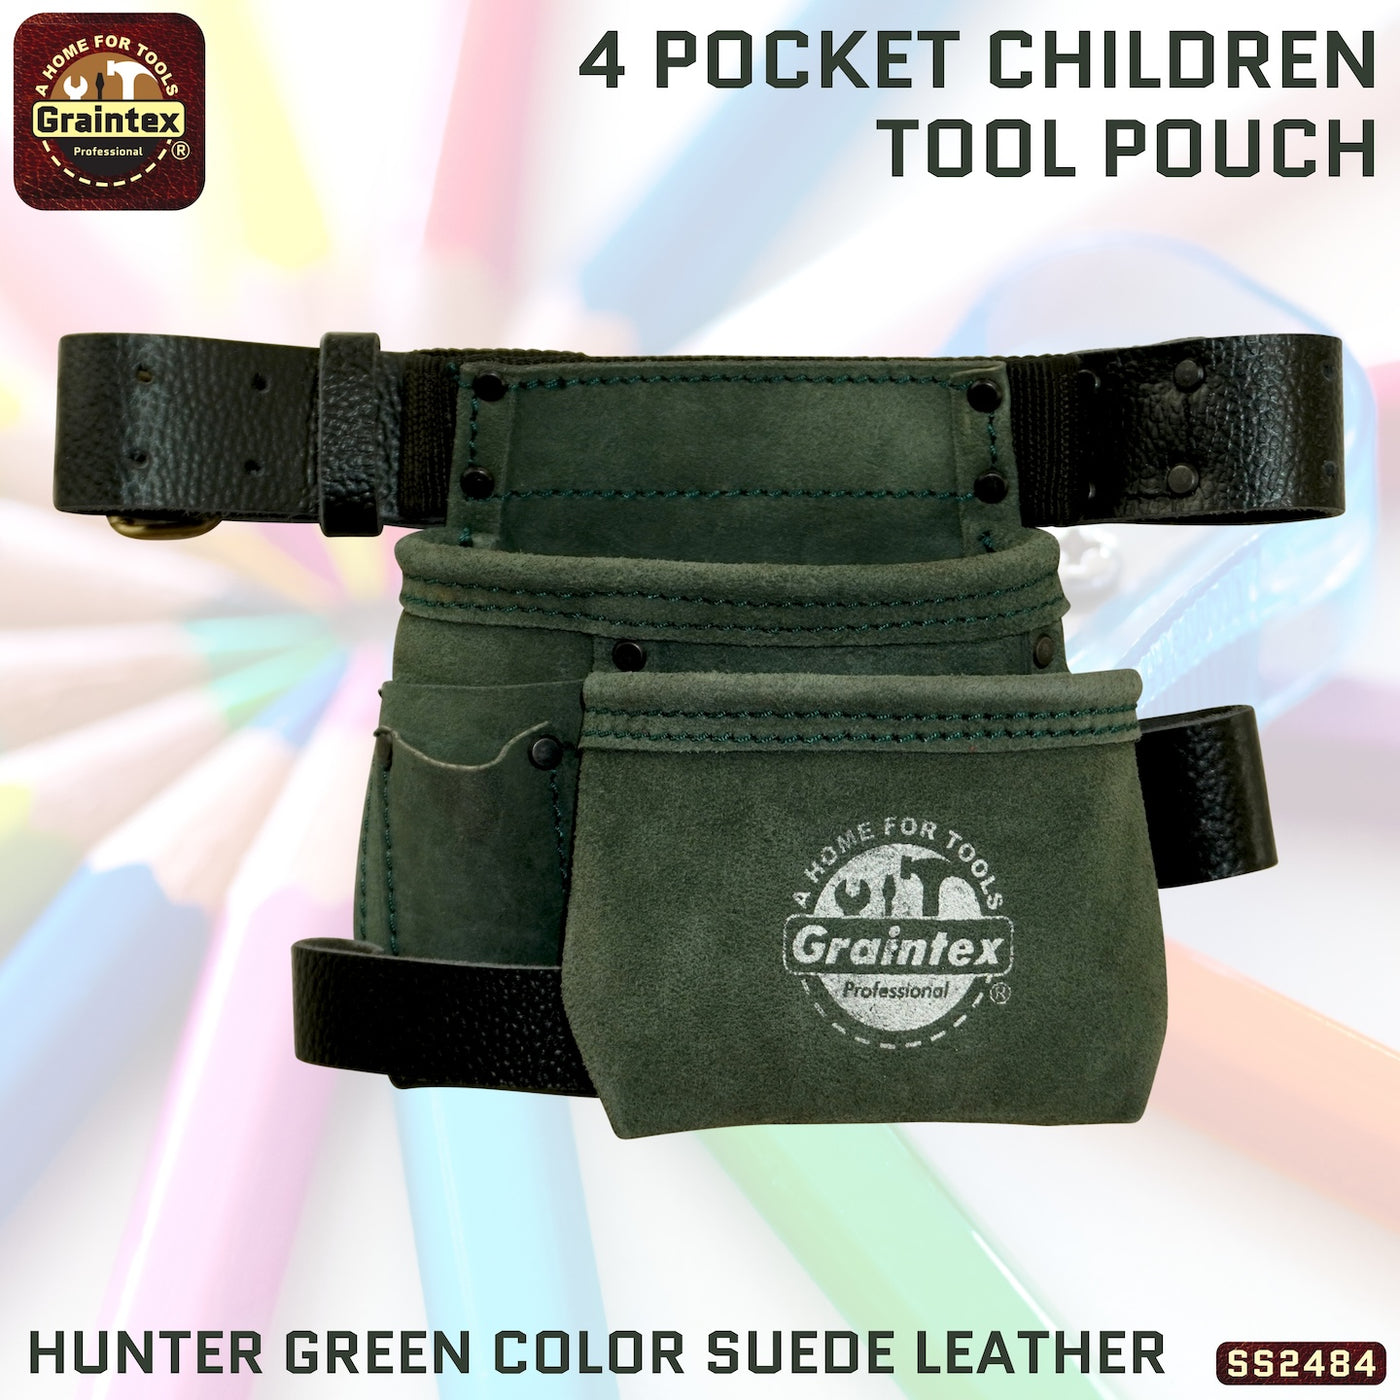 SS2484 :: 4 Pocket Children Tool Pouch Hunter Green Color Suede Leather